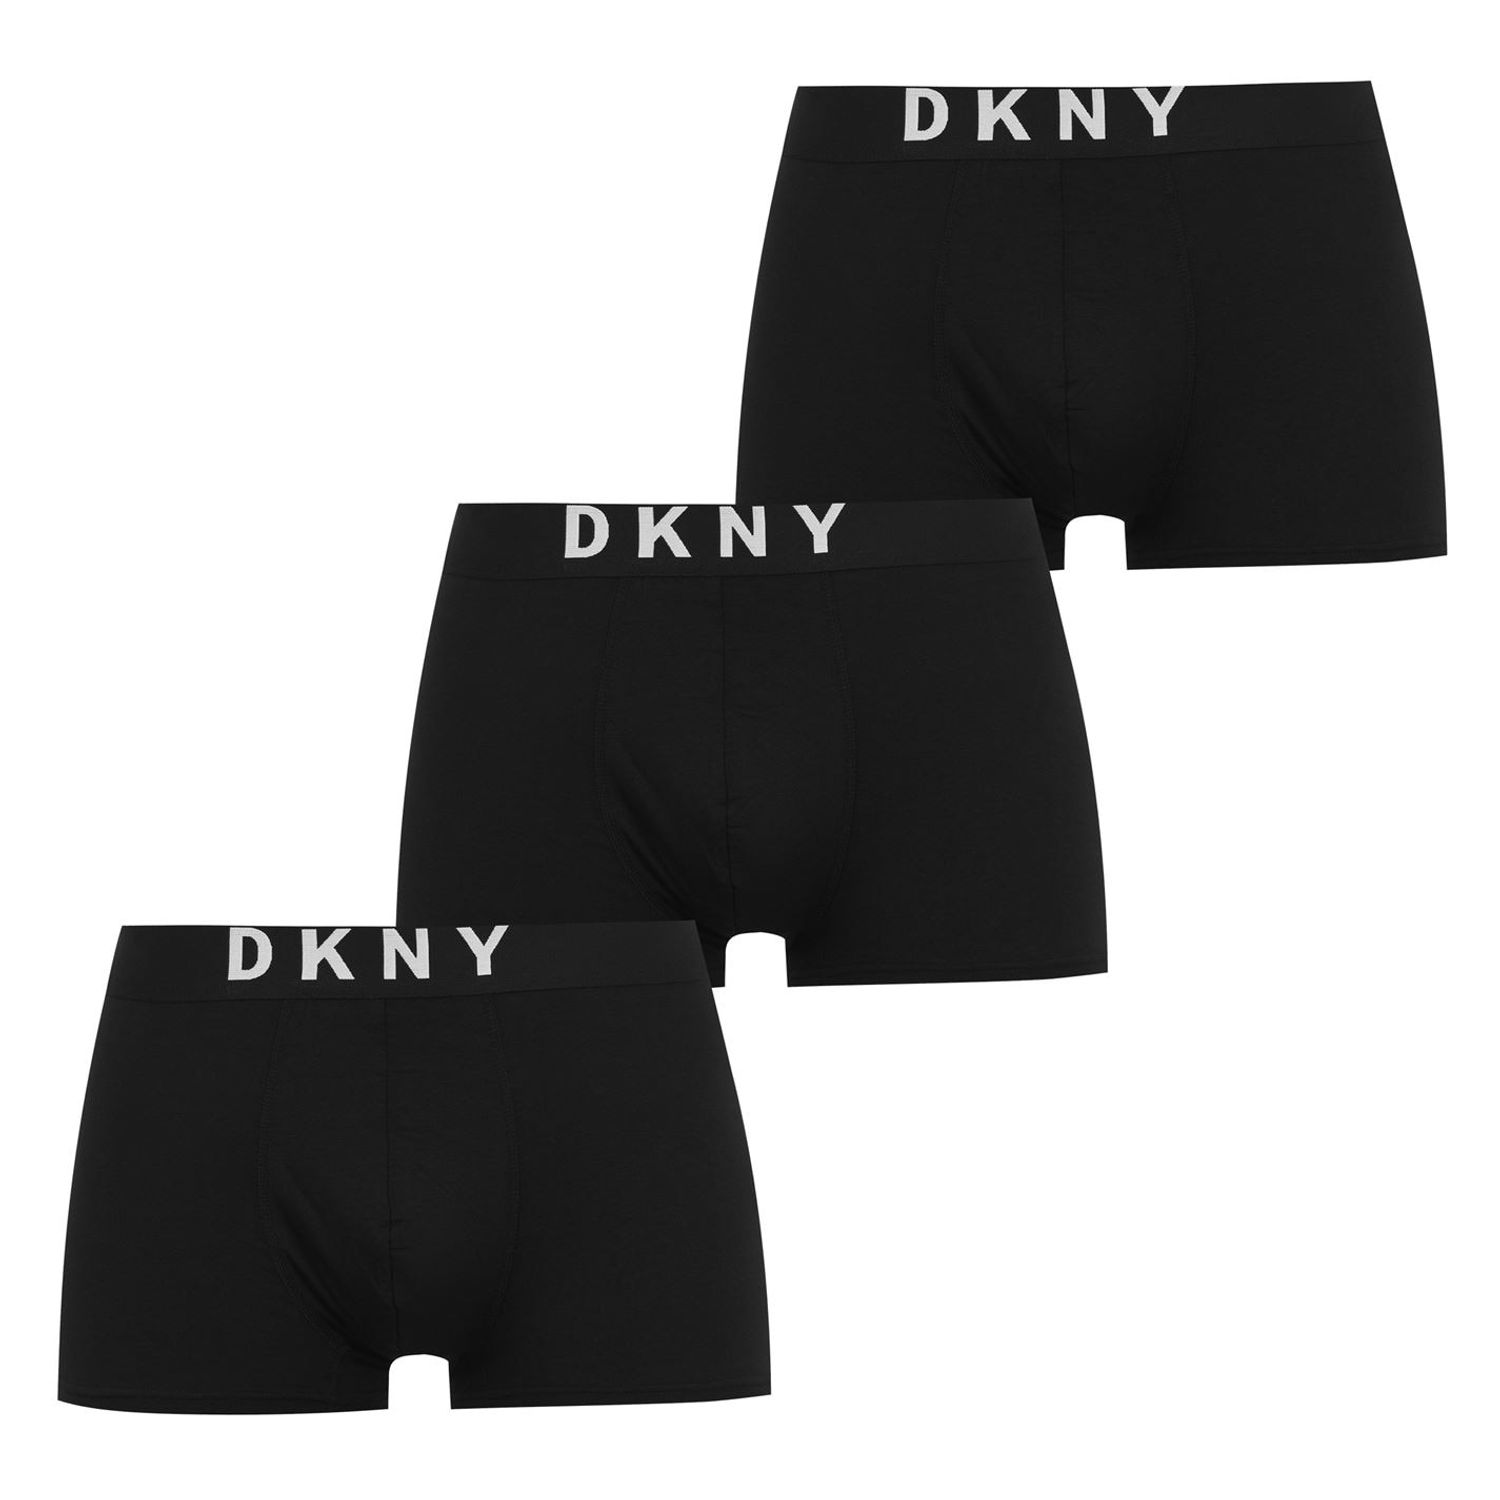 Black DKNY 3 Pack Boxer Shorts - Get The Label